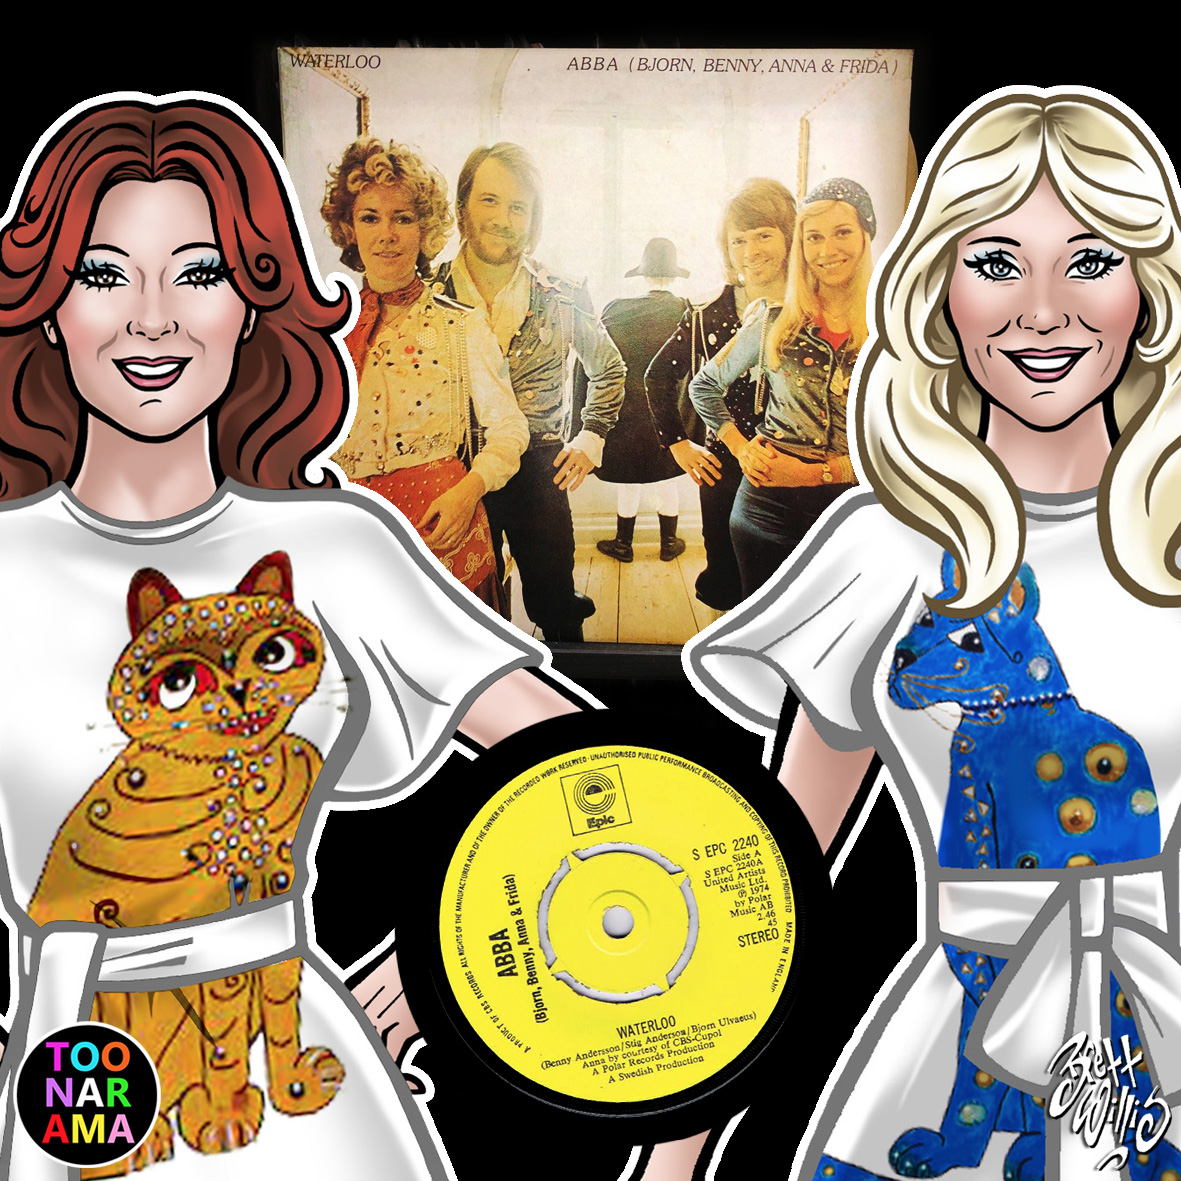 Celebrating INSPIRATIONAL MUSIC 'WATERLOO' - ABBA Released: March 4, 1974 Composed by Benny Andersson & Bjorn Ulvaeus Winner: 1974 Eurovision Song Contest 'Waterloo, promise to love you forever more' #waterloo #ABBA #EurovisionSongContest #Sweden #toonarama